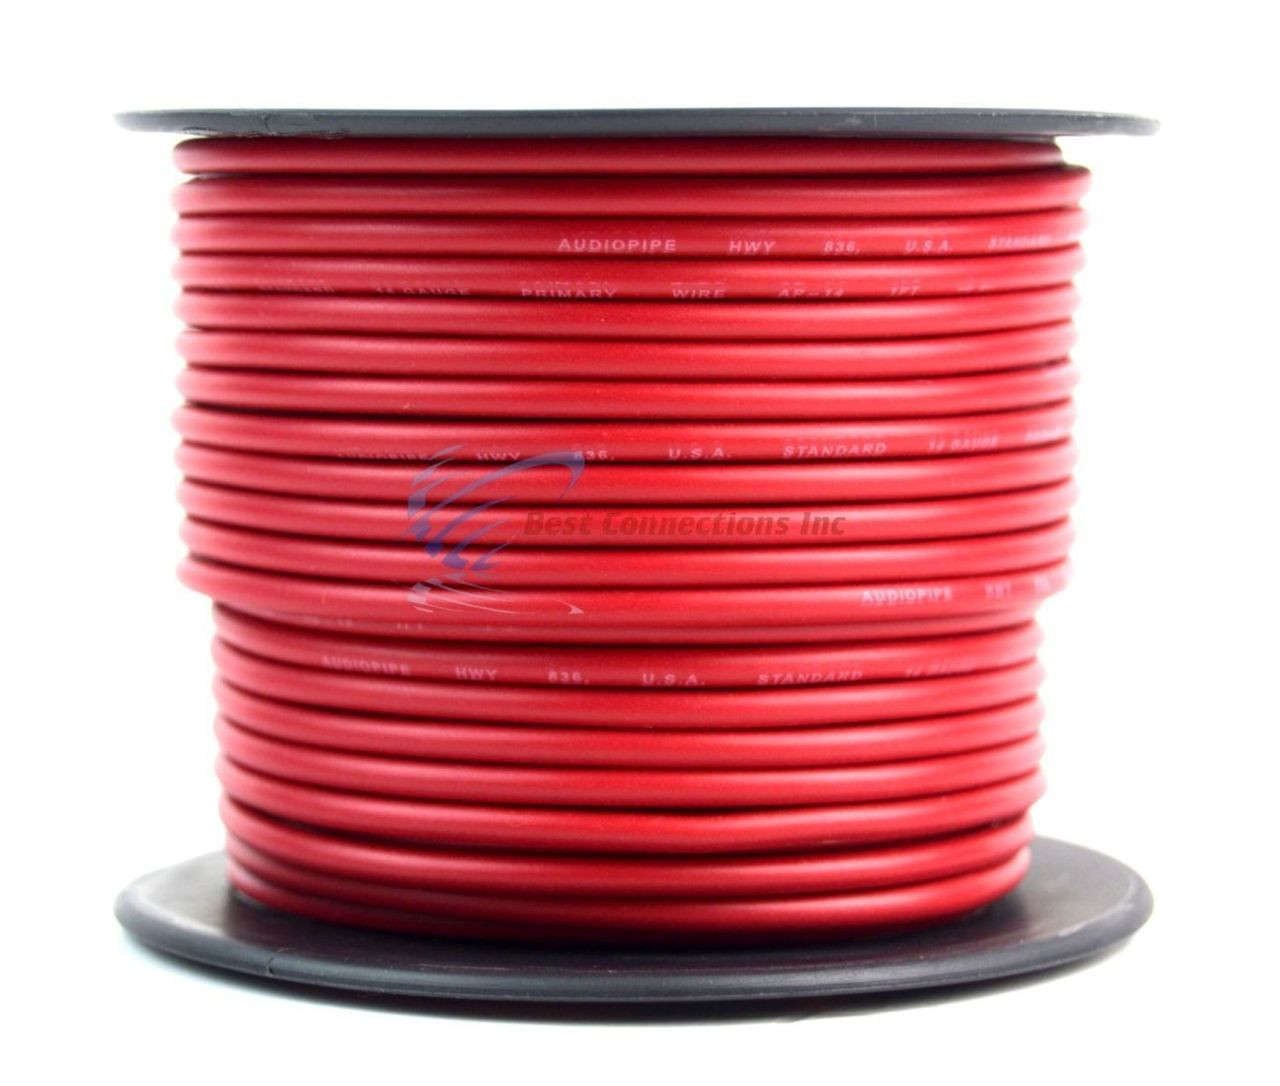 14 GAUGE WIRE RED & BLACK POWER GROUND 100 FT EACH PRIMARY STRANDED COPPER  CLAD - Best Connections